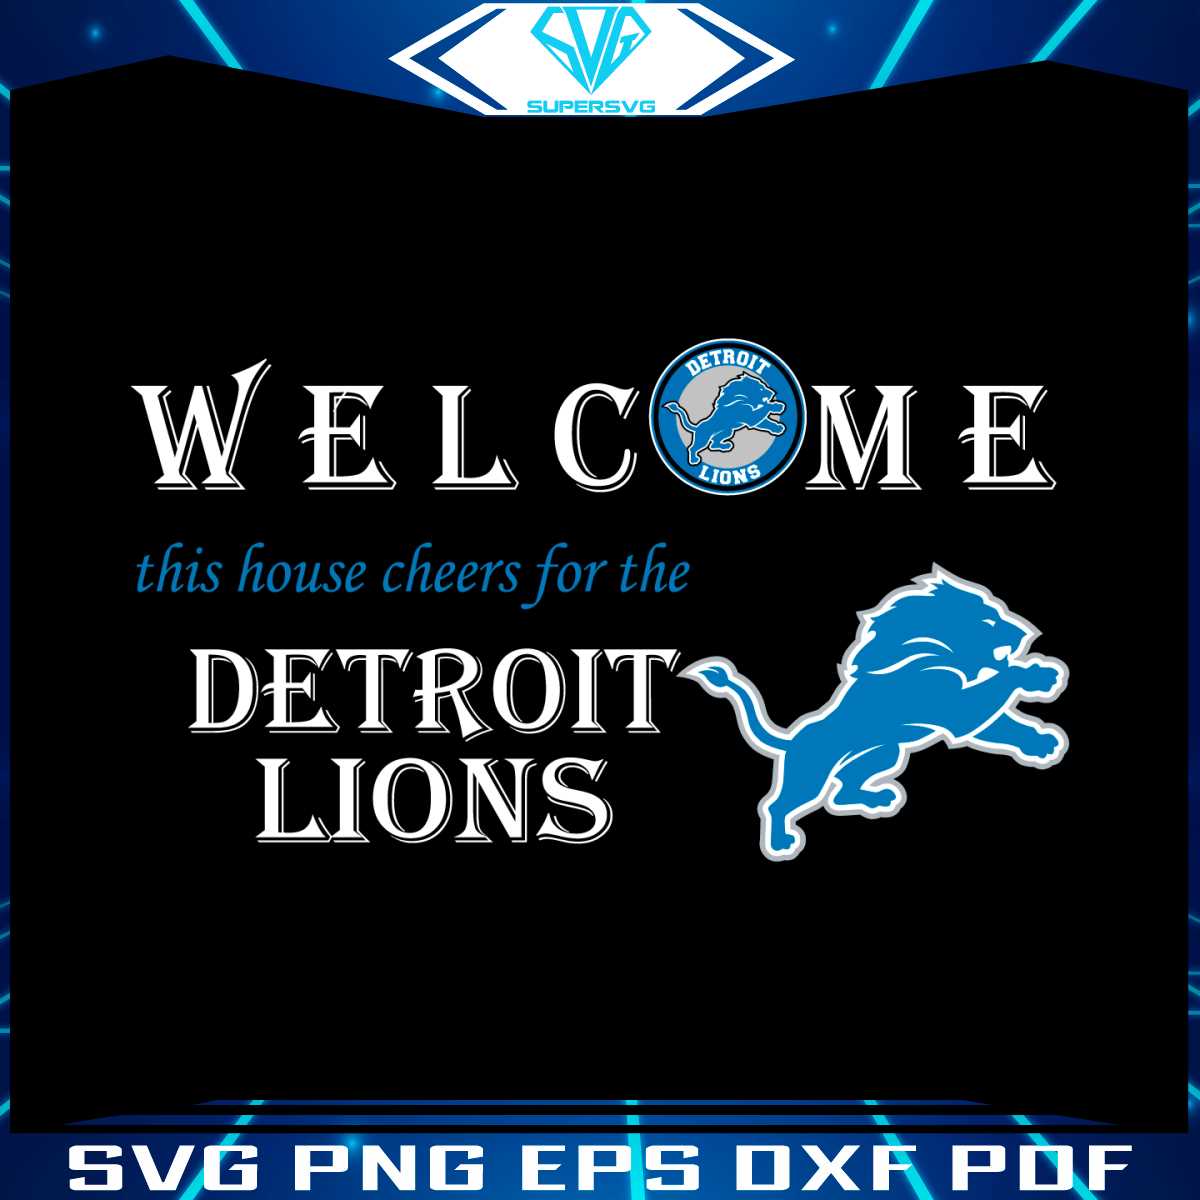 welcome-this-house-cheers-for-the-detroit-lions-svg